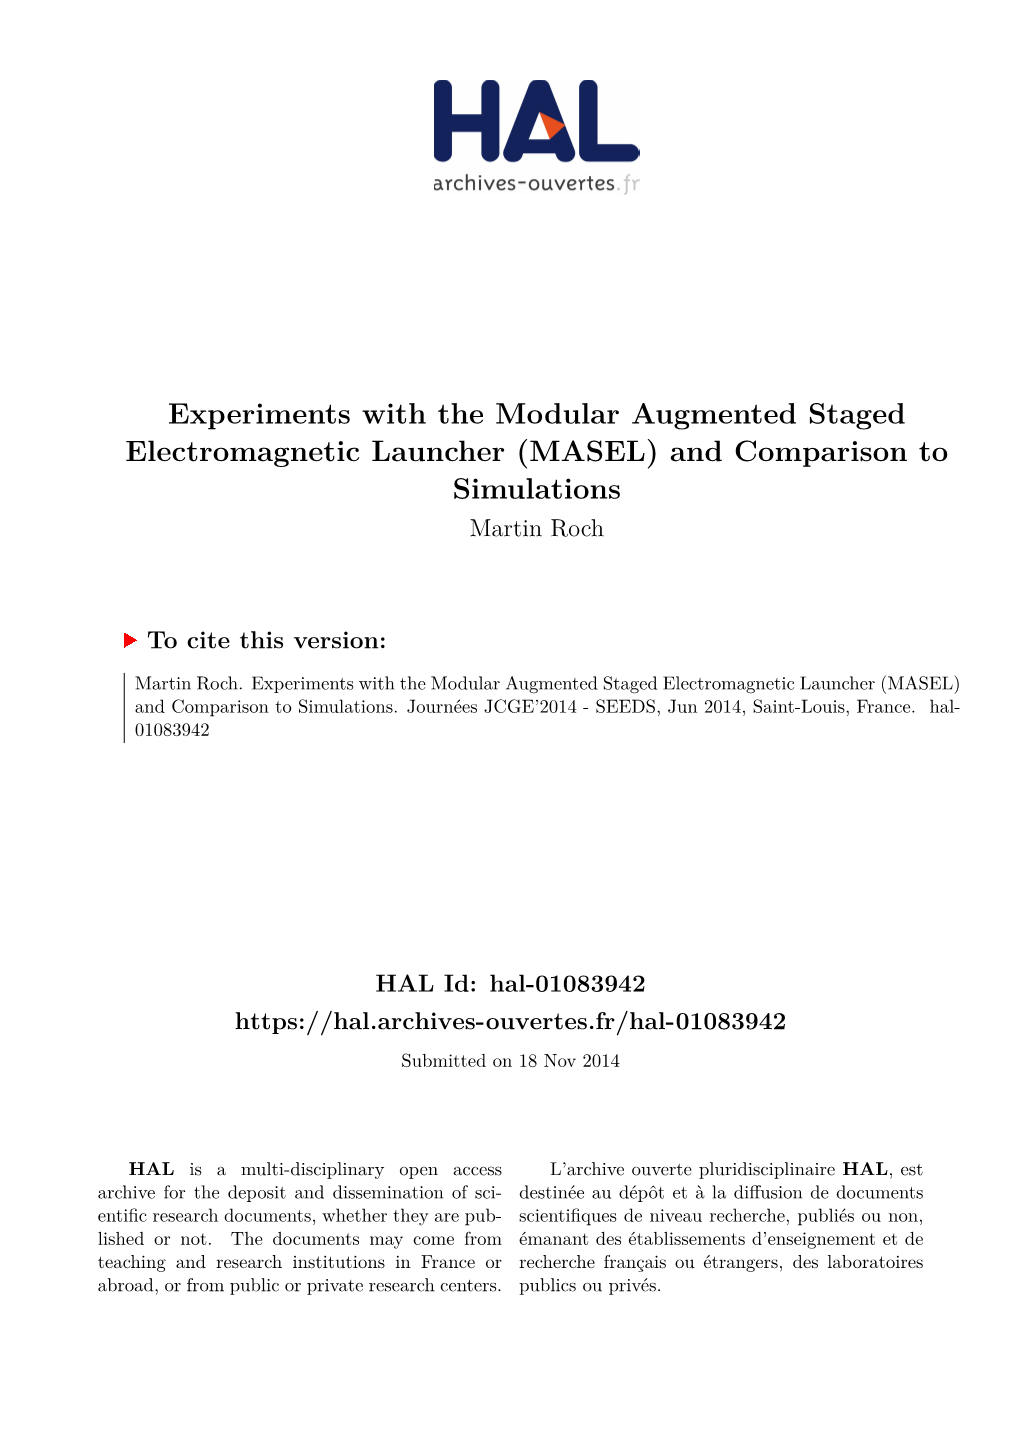 Experiments with the Modular Augmented Staged Electromagnetic Launcher (MASEL) and Comparison to Simulations Martin Roch